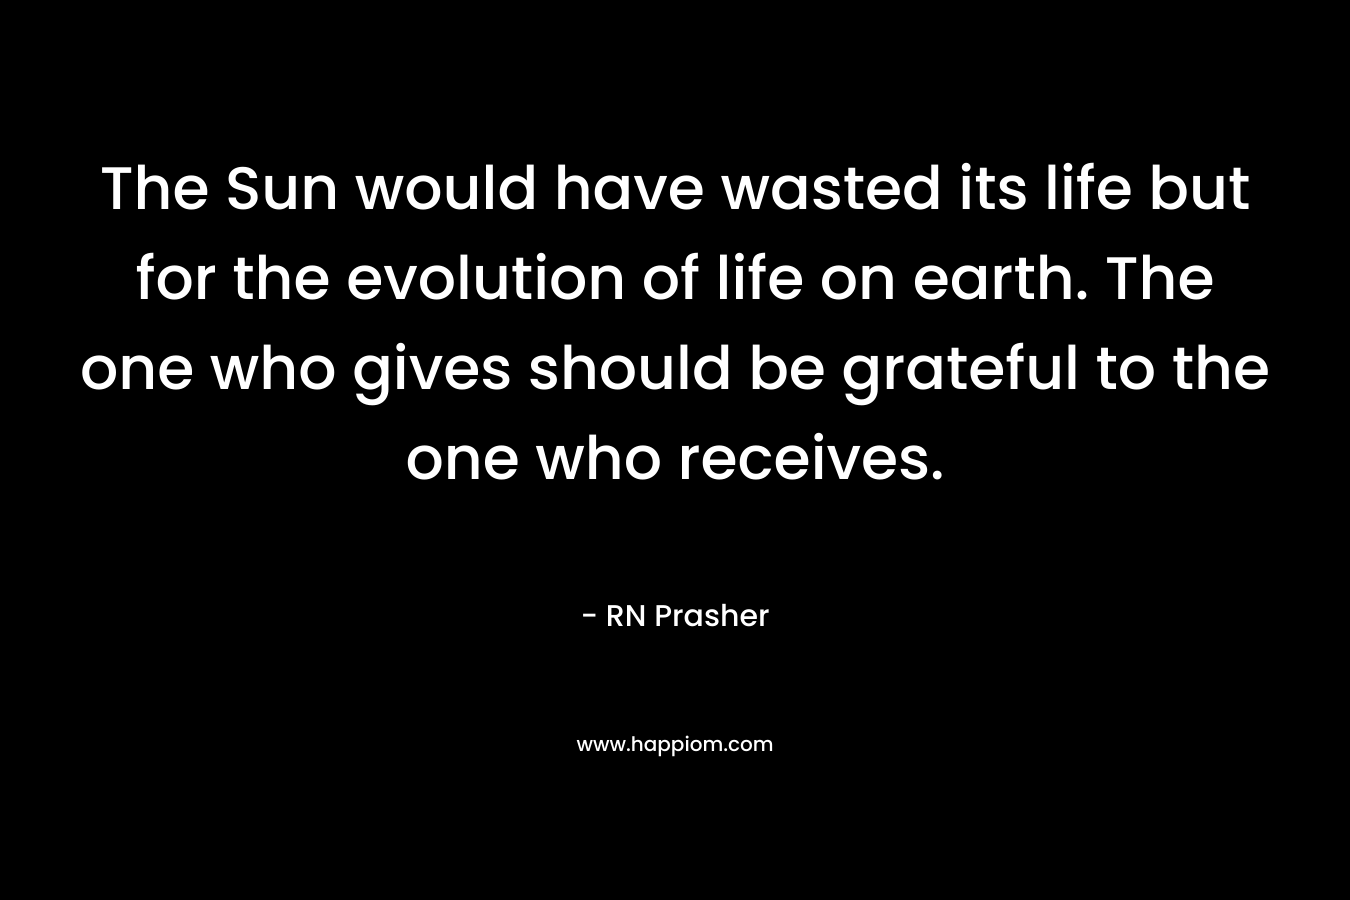 The Sun would have wasted its life but for the evolution of life on earth. The one who gives should be grateful to the one who receives.